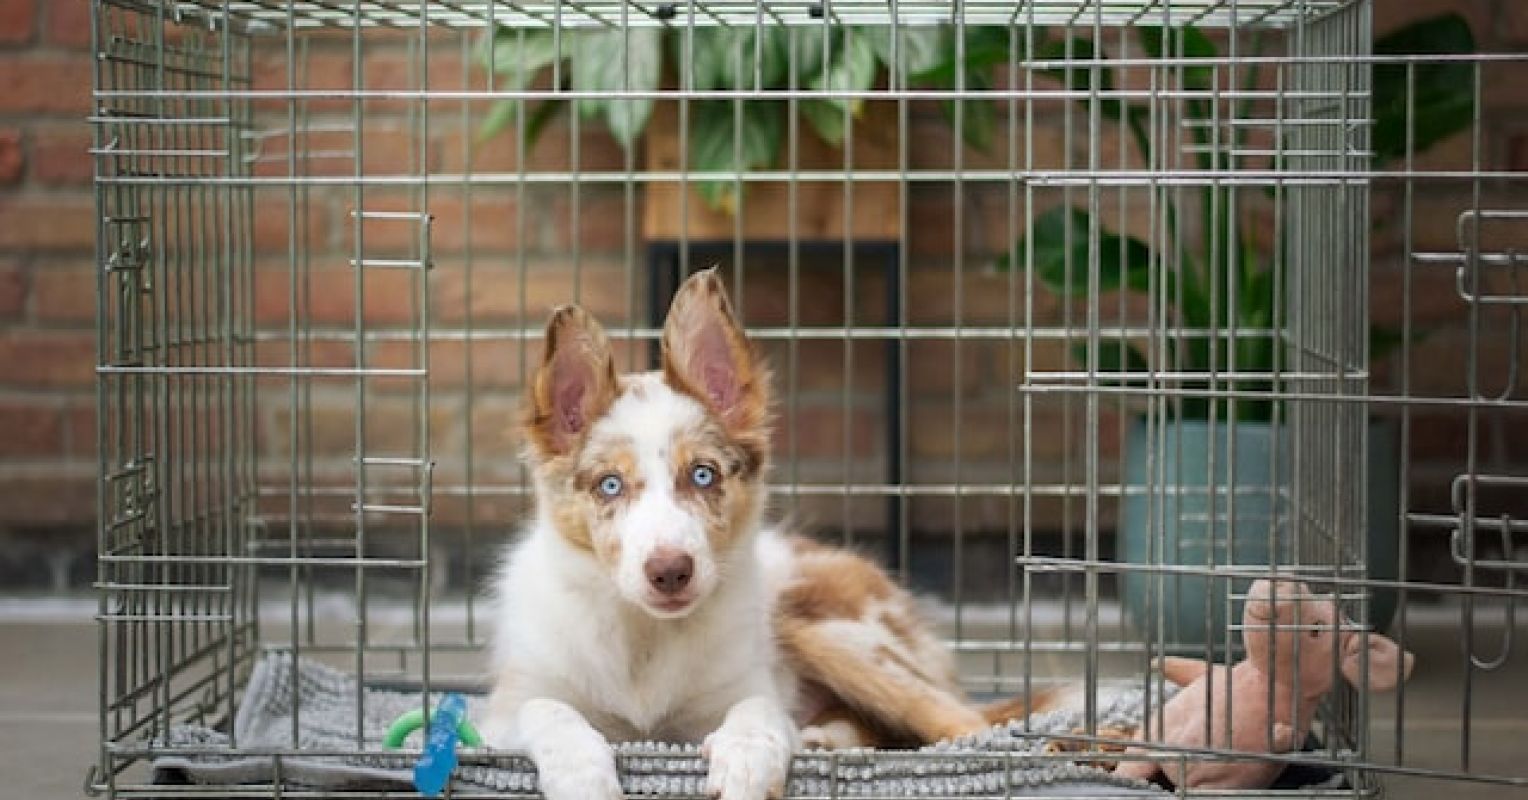 The Ethics of Crating Dogs